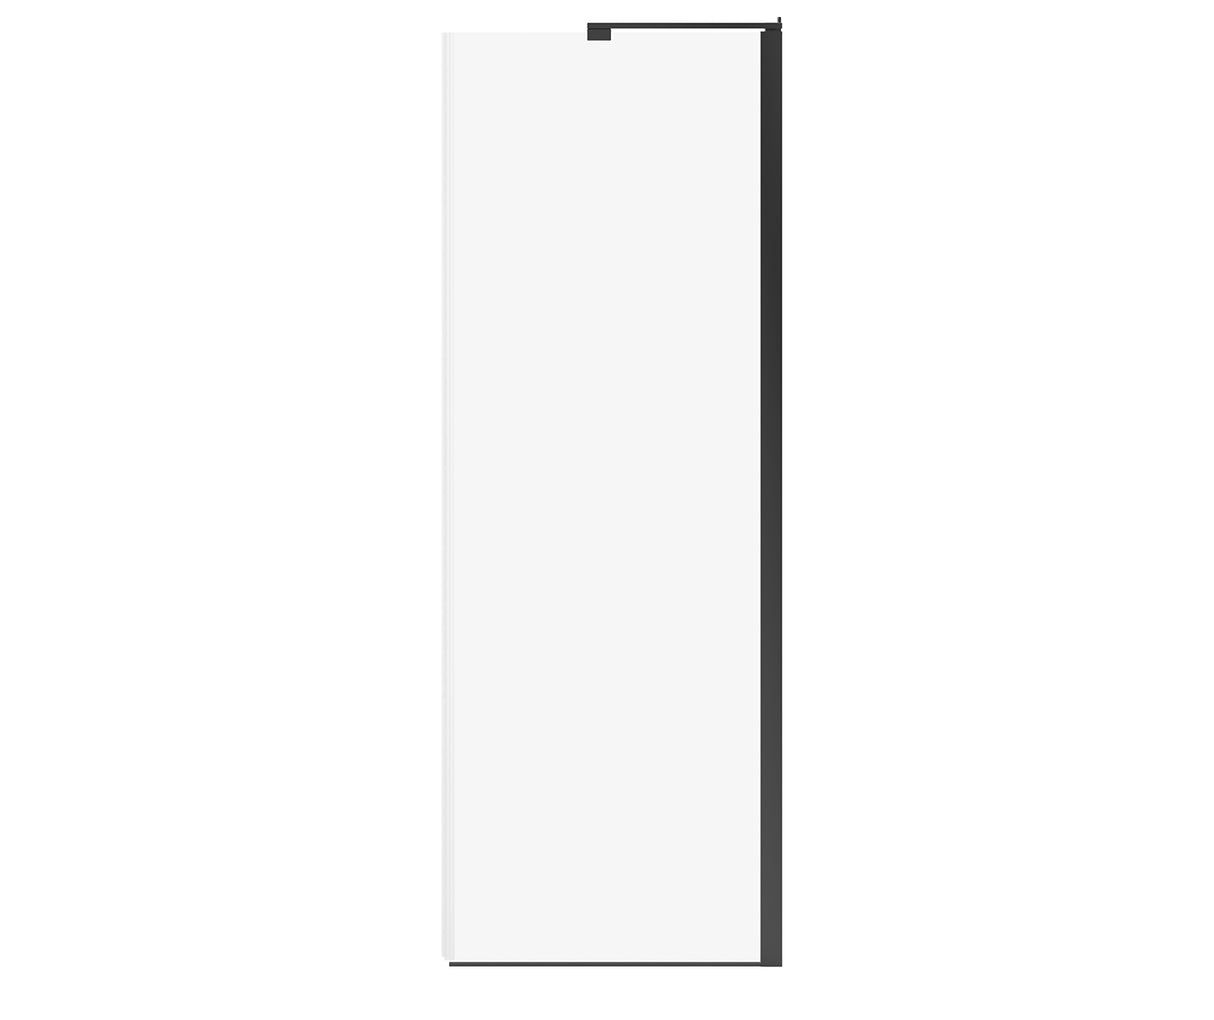 MAAX 139588-810-340-000 Capella 78 Return Panel for 32 in. Base with GlassShield® glass in Matte Black